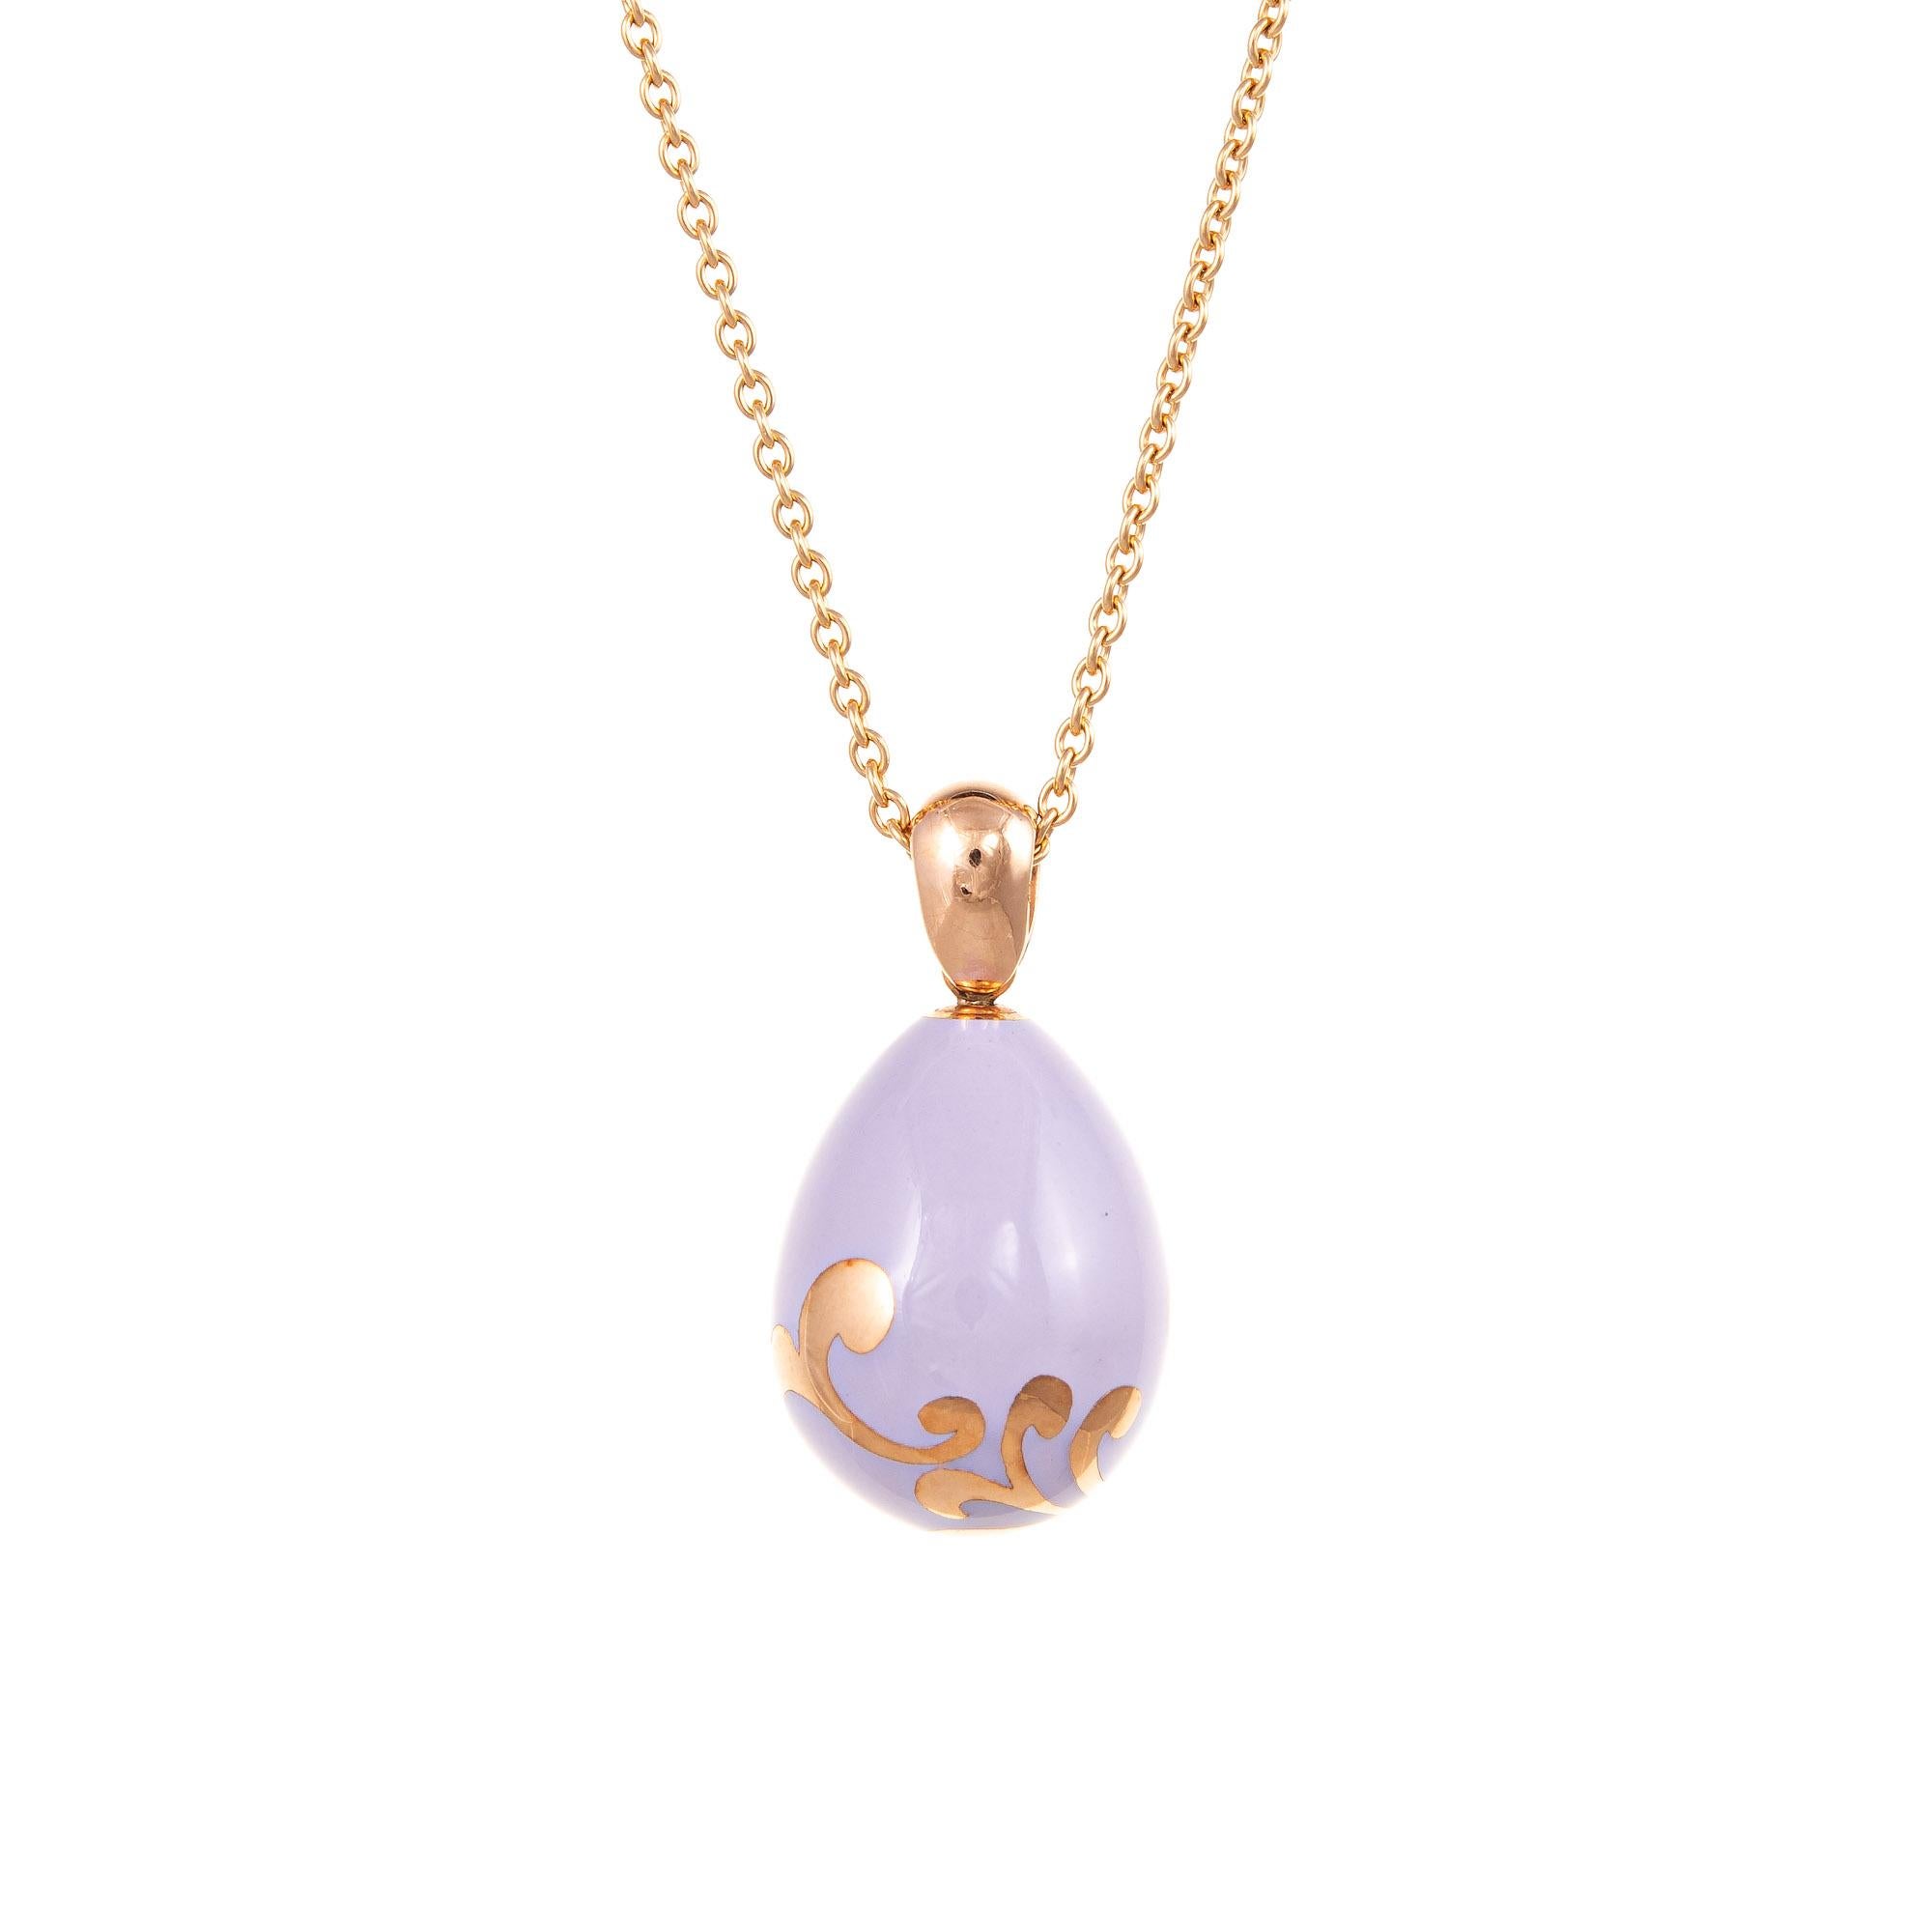 Modern Faberge Egg Pendant Necklace 18 Karat Rose Gold Lilac Purple Fine Jewelry Chain For Sale